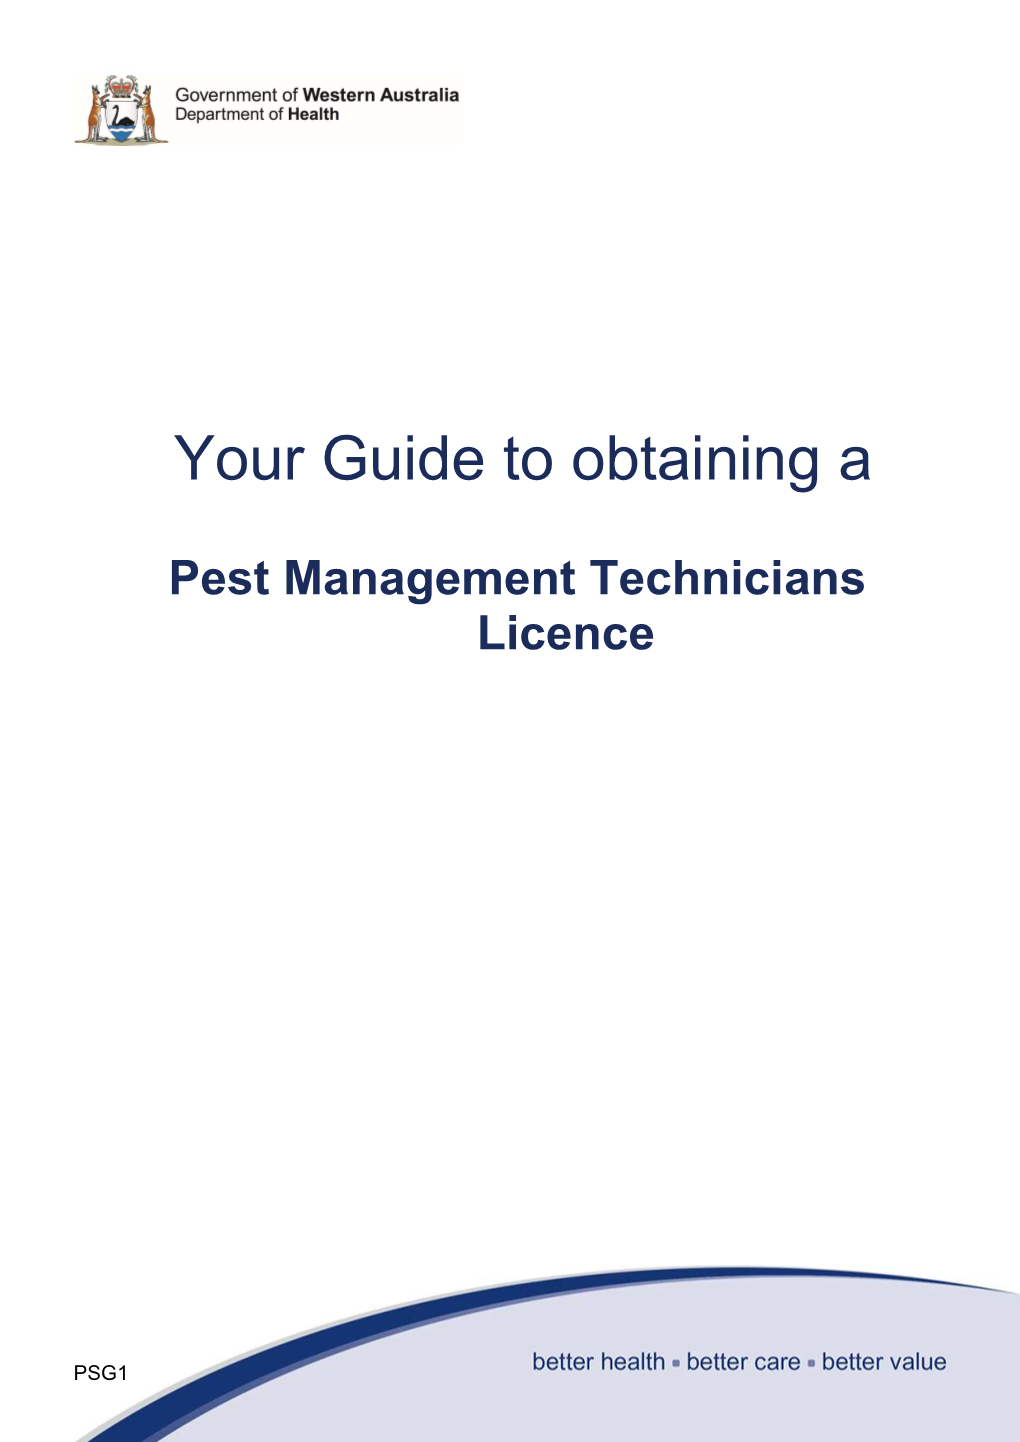 Guide to Obtaining a Pest Management Technicians Licence